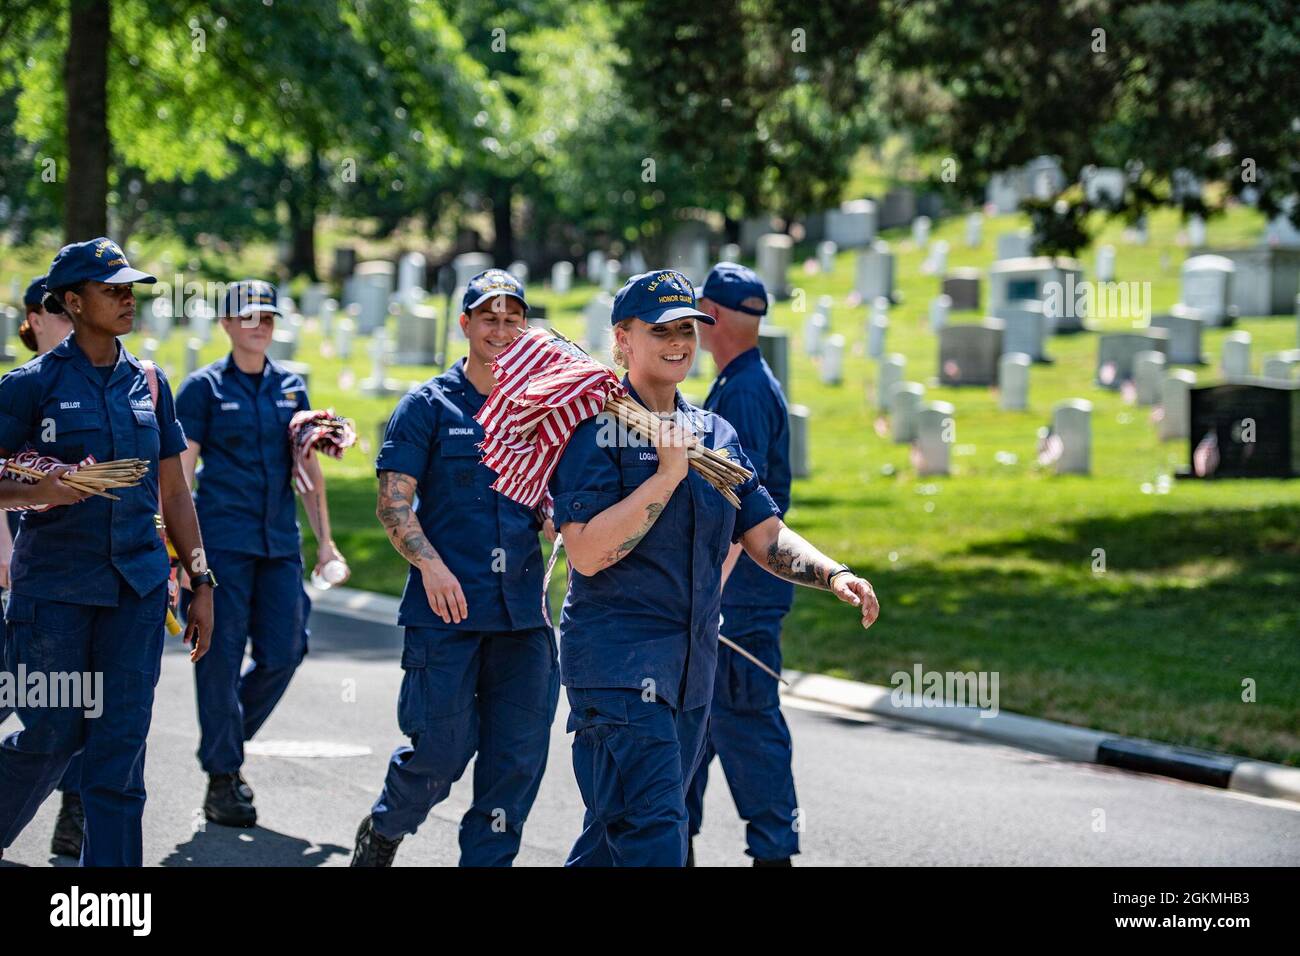 Coast guardsmen assist in placing over 265,000 U.S. flags at every gravesite, columbarium court column, and niche wall column as part of Flags-In at Arlington National Cemetery, Arlington, Virginia, May 27, 2021.    For more than 50 years, soldiers from The Old Guard have honored our nation’s fallen military heroes by placing U.S. flags at the gravesites of service members buried at both Arlington National Cemetery and the U.S. Soldiers’ and Airmen’s Home National Cemetery just prior to the Memorial Day weekend. For the first time in 20 years, members from the U.S. Marine Corps, the U.S. Navy, Stock Photo